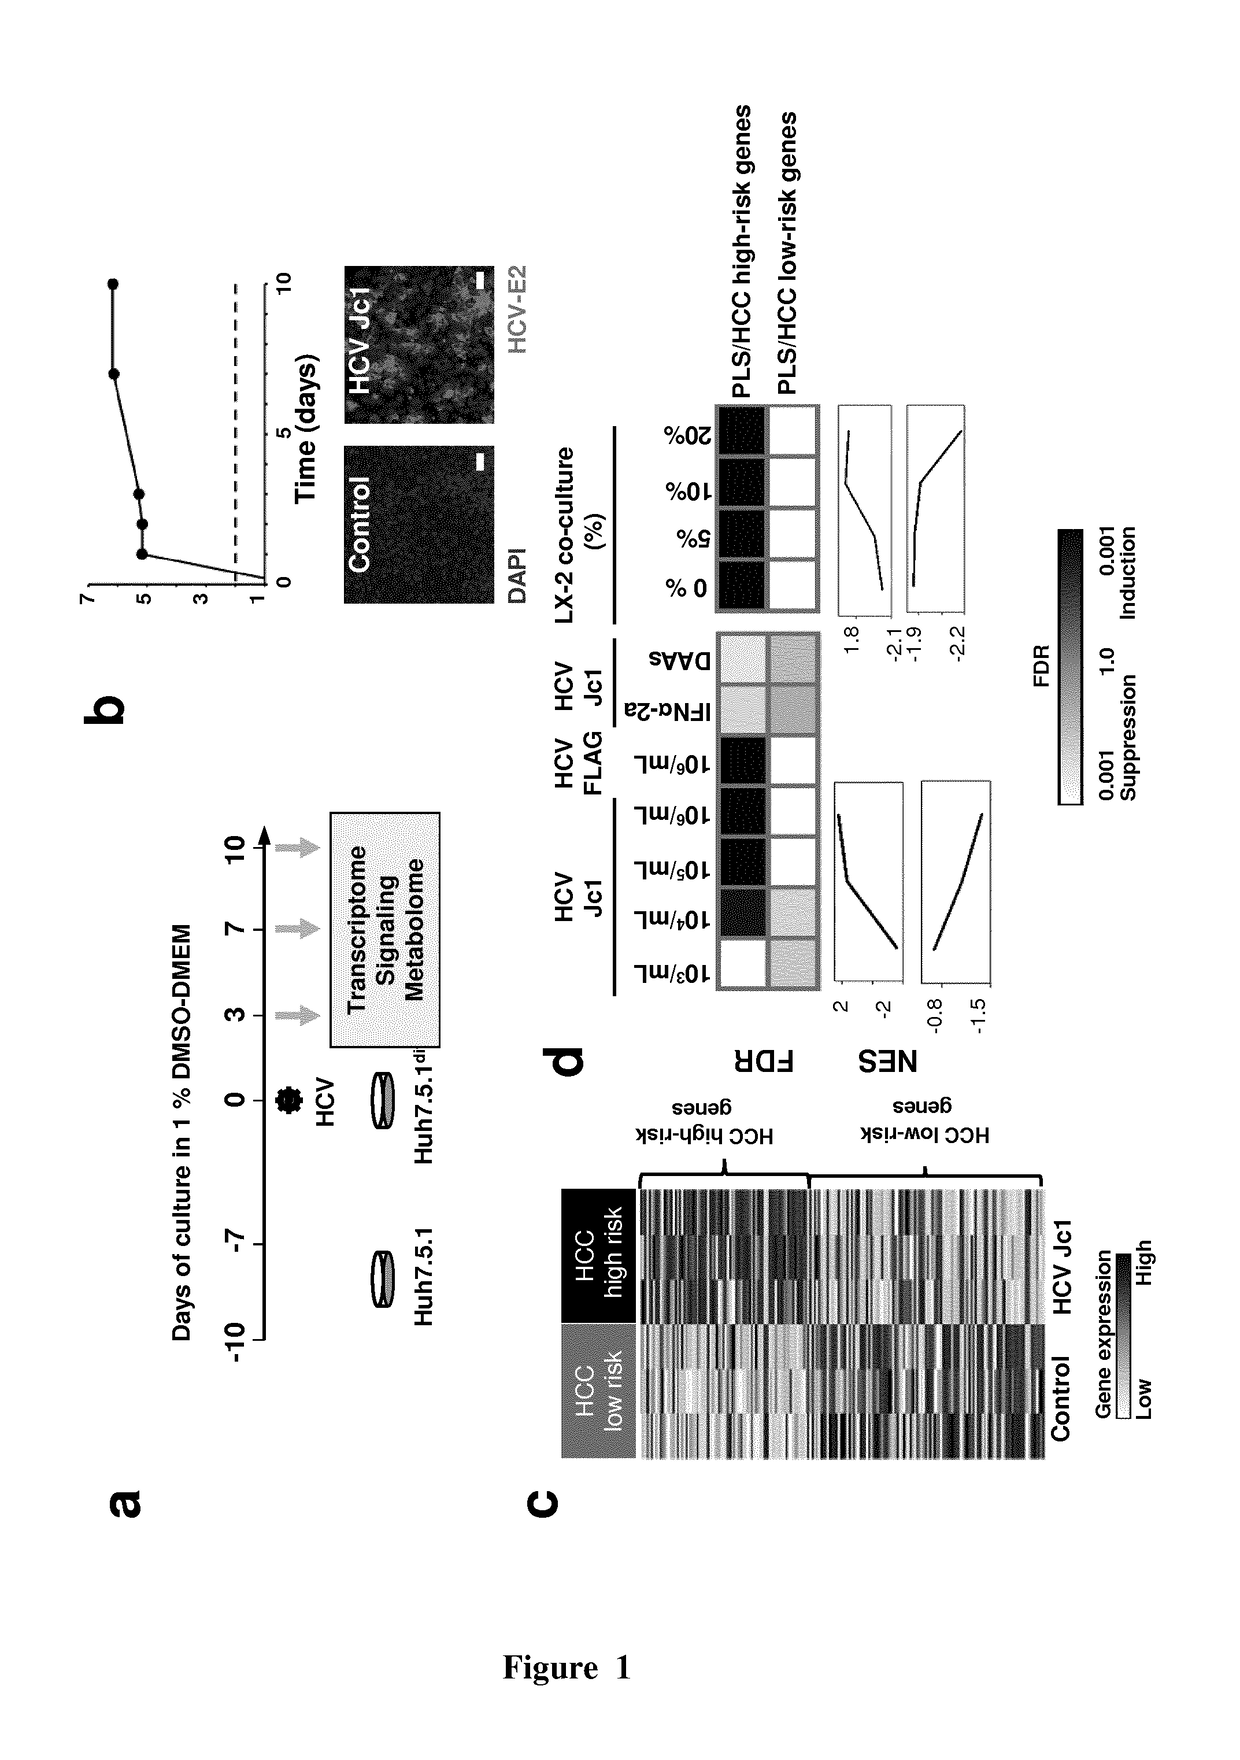 Clinical gene signature-based human cell culture model and uses thereof